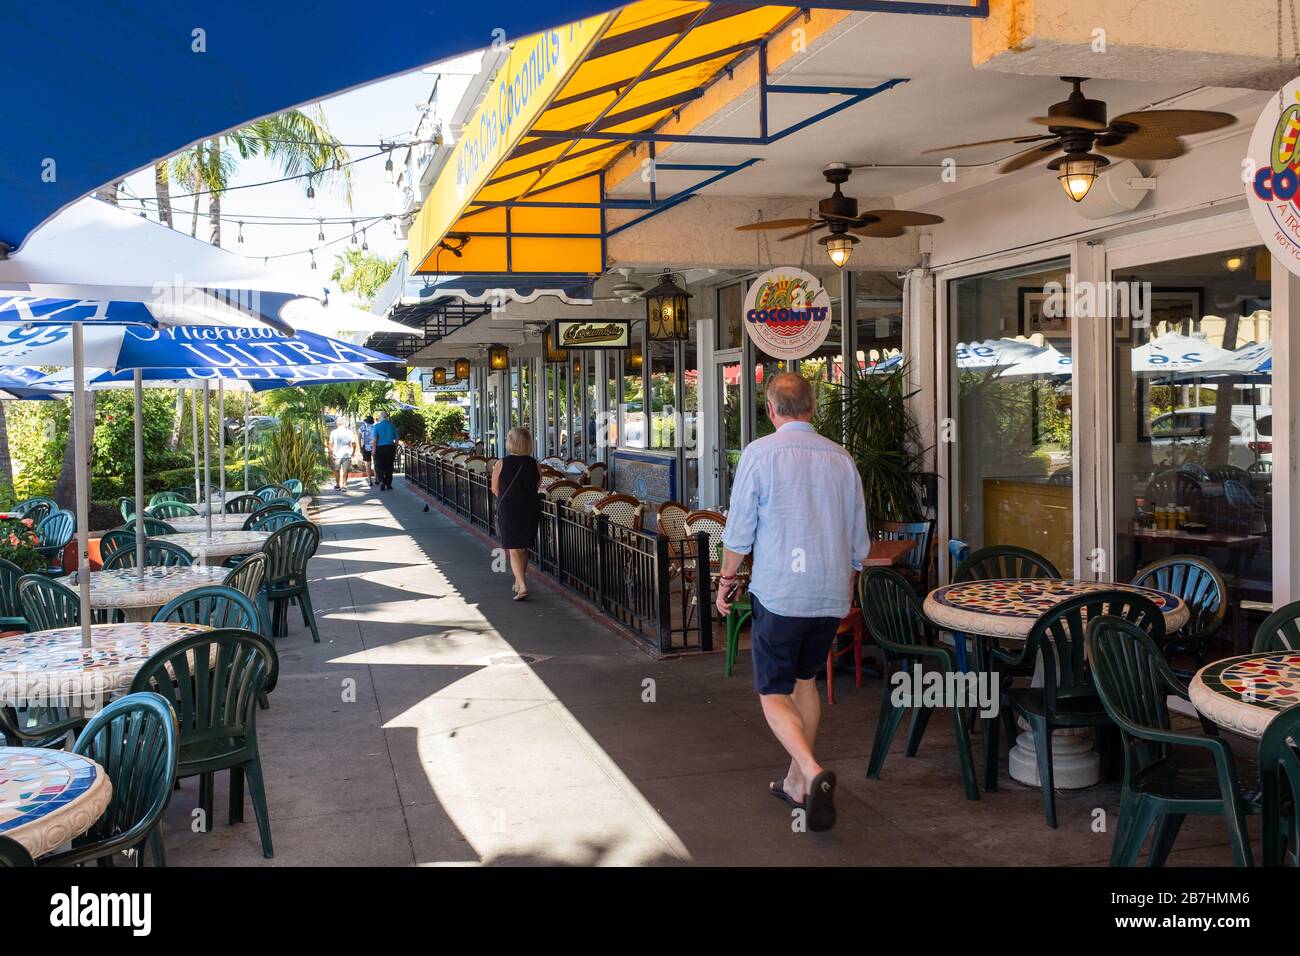 Restaurants in St. Armands Circle on Lido Key in Sarasota, Florida begin to see the effects of COVID-19 as sales begin to slow down. Stock Photo